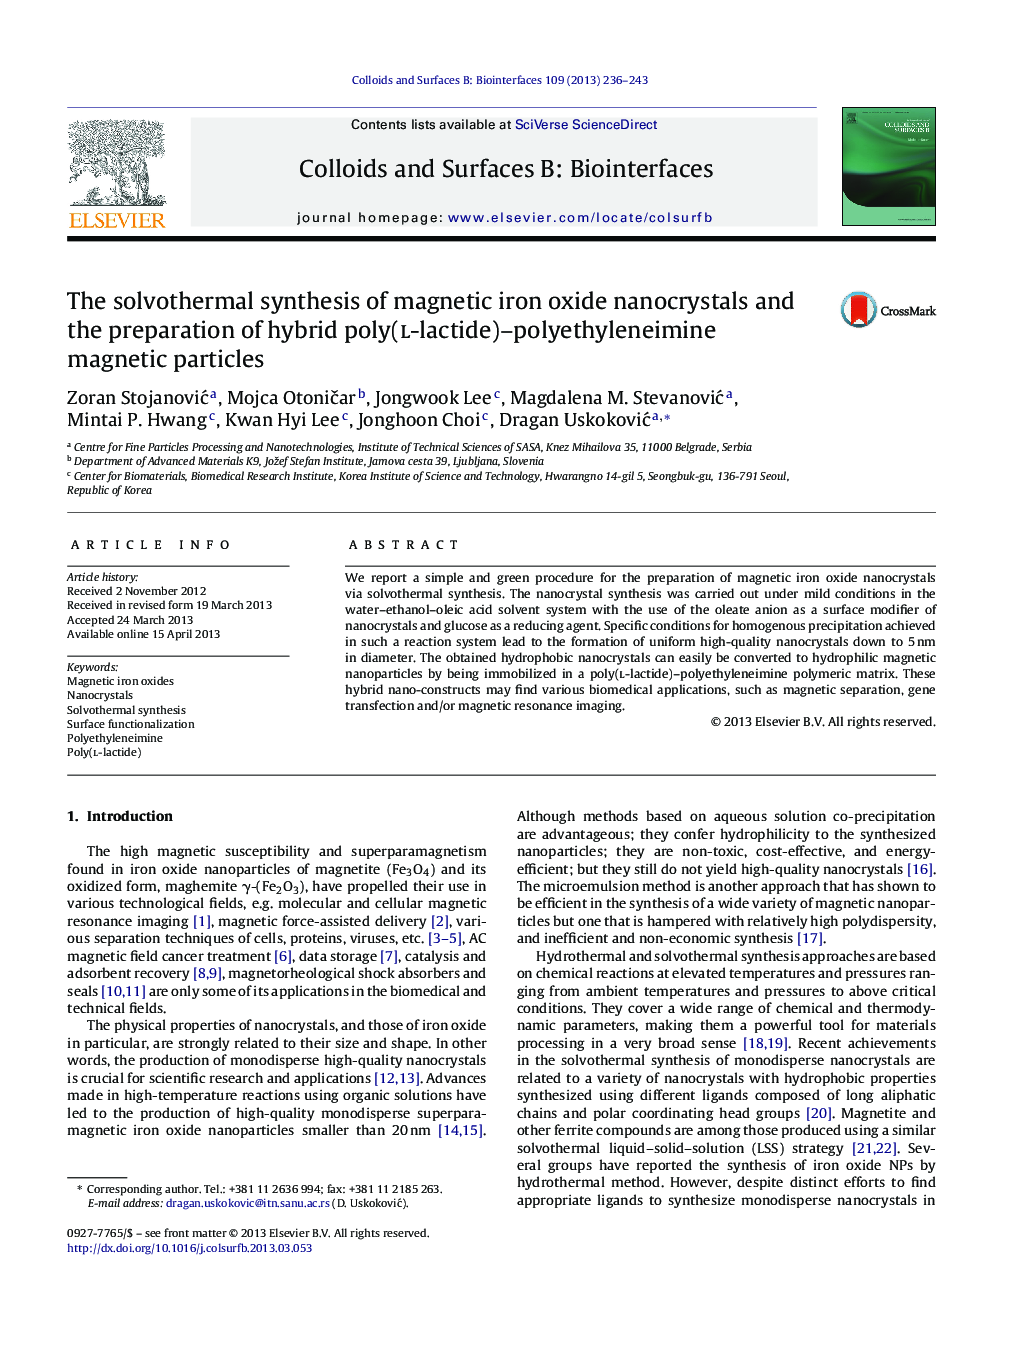 The solvothermal synthesis of magnetic iron oxide nanocrystals and the preparation of hybrid poly(l-lactide)-polyethyleneimine magnetic particles